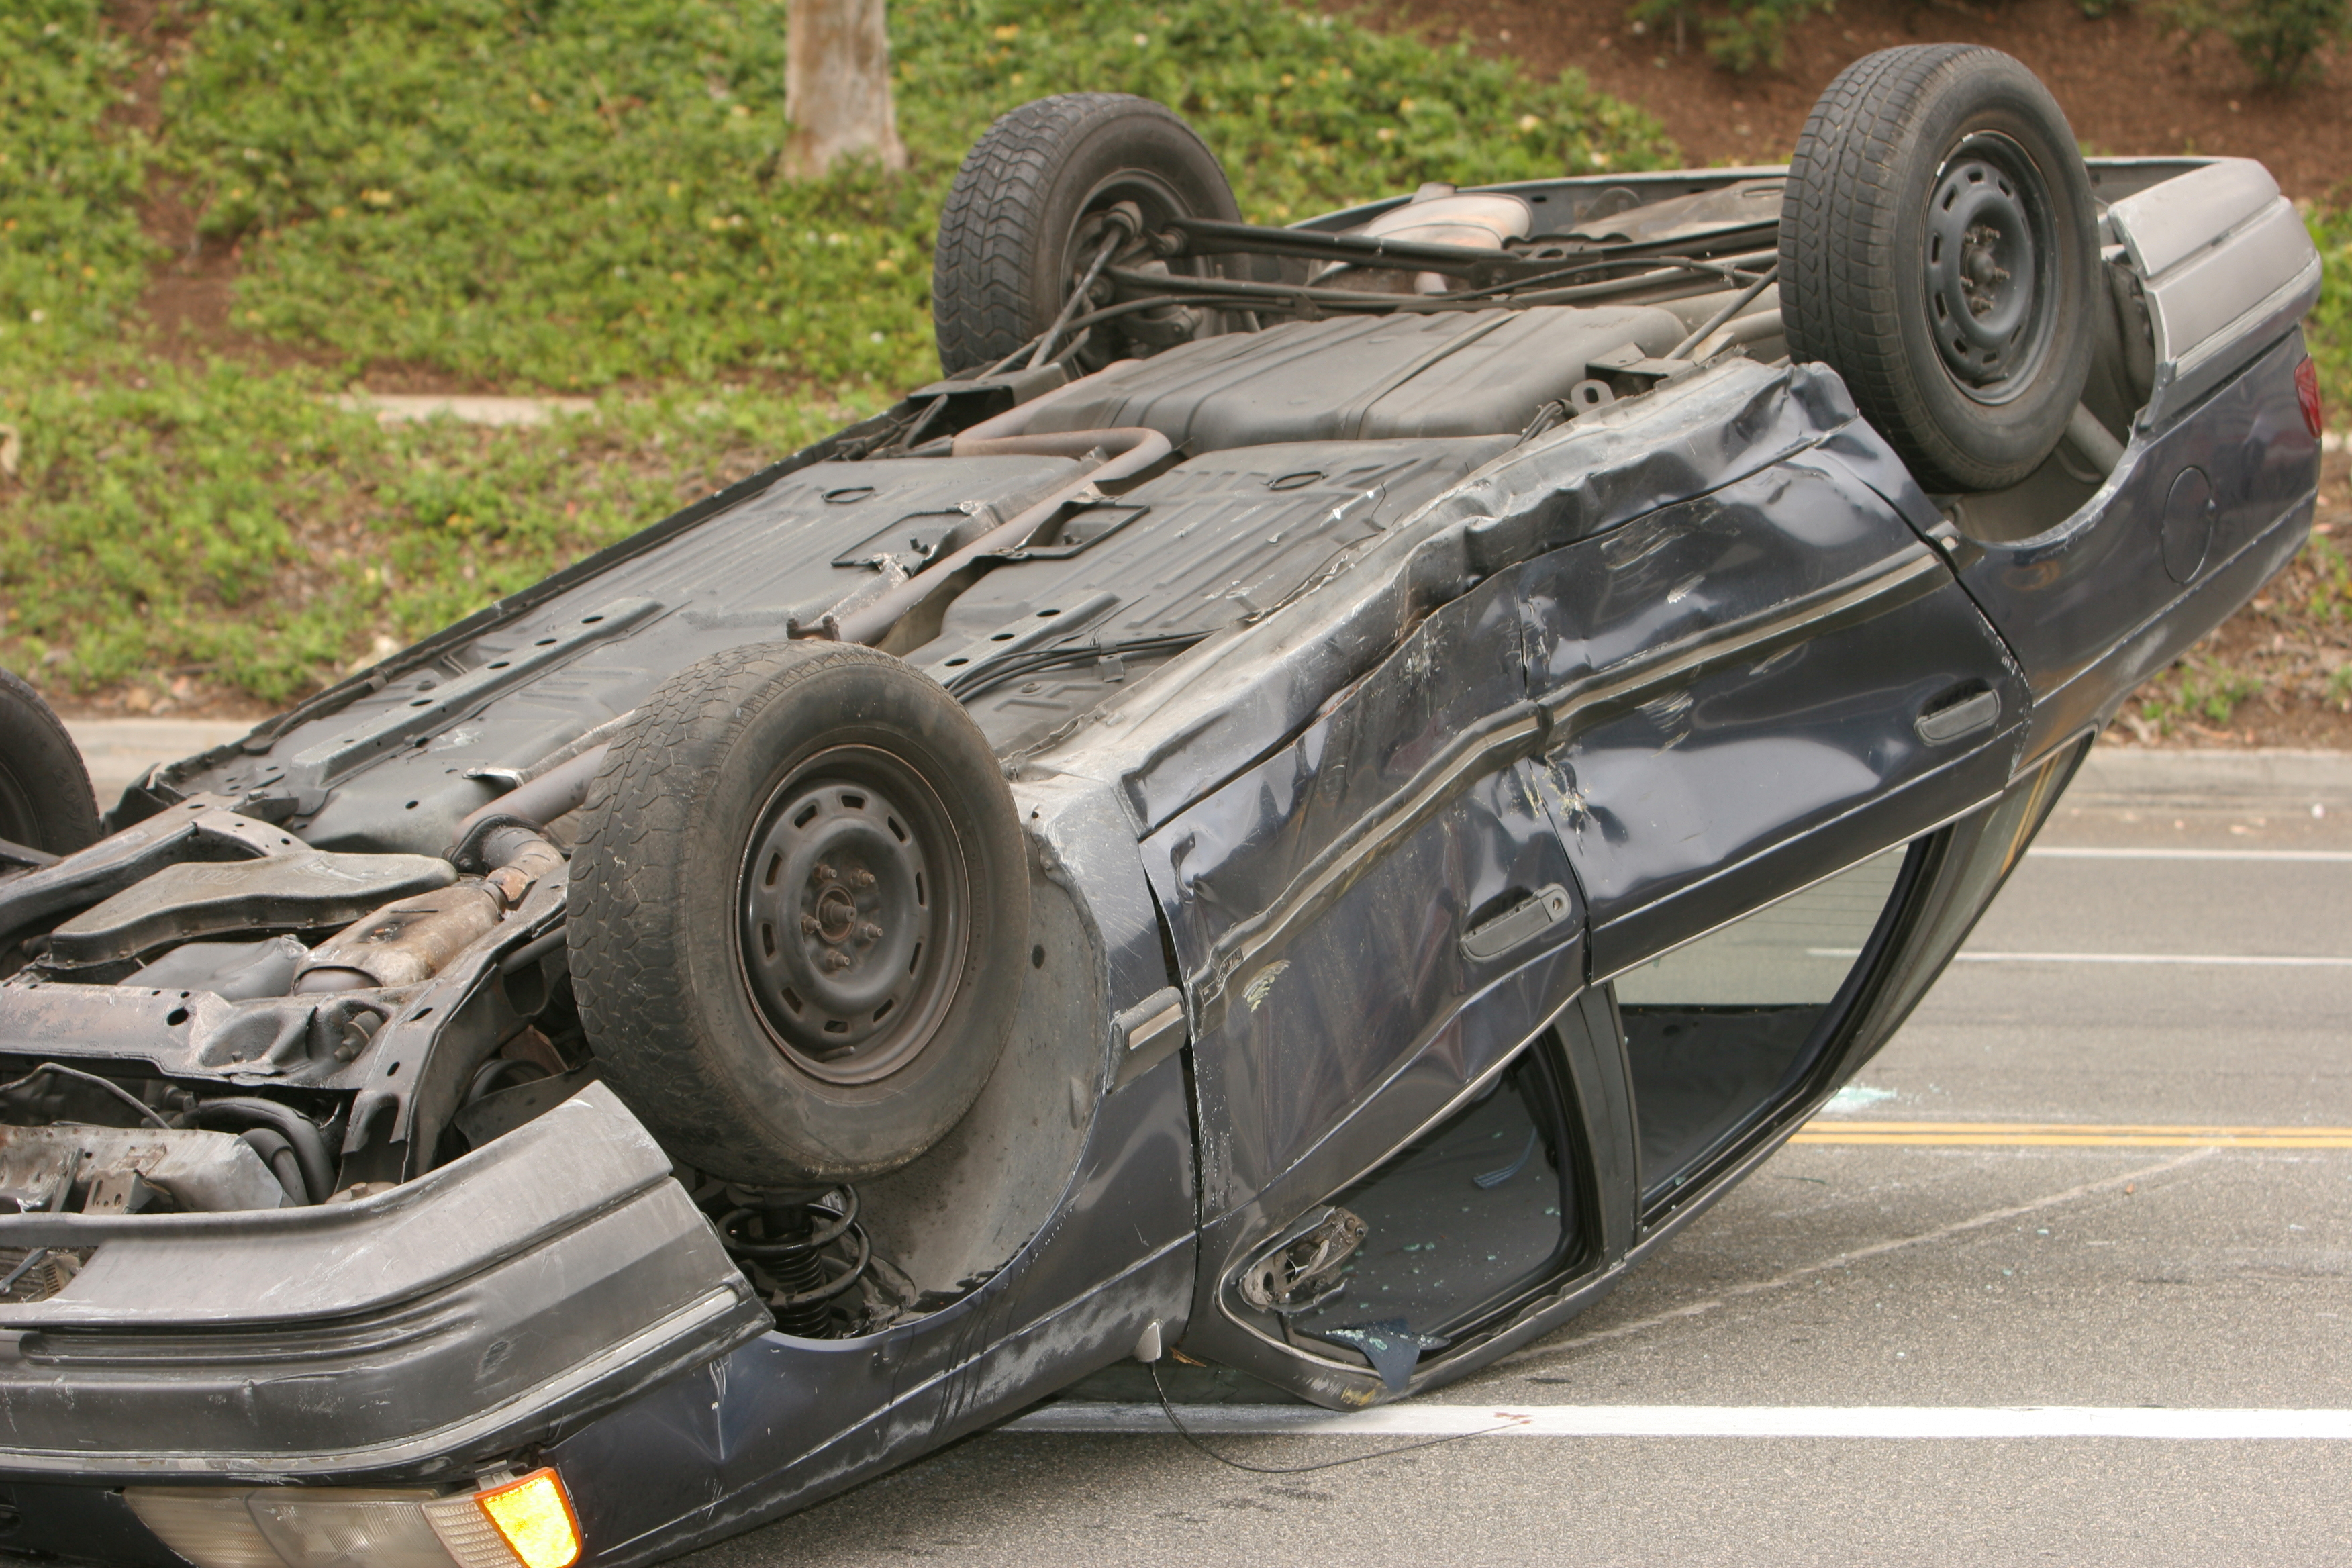 Overturned car on a road after an accident